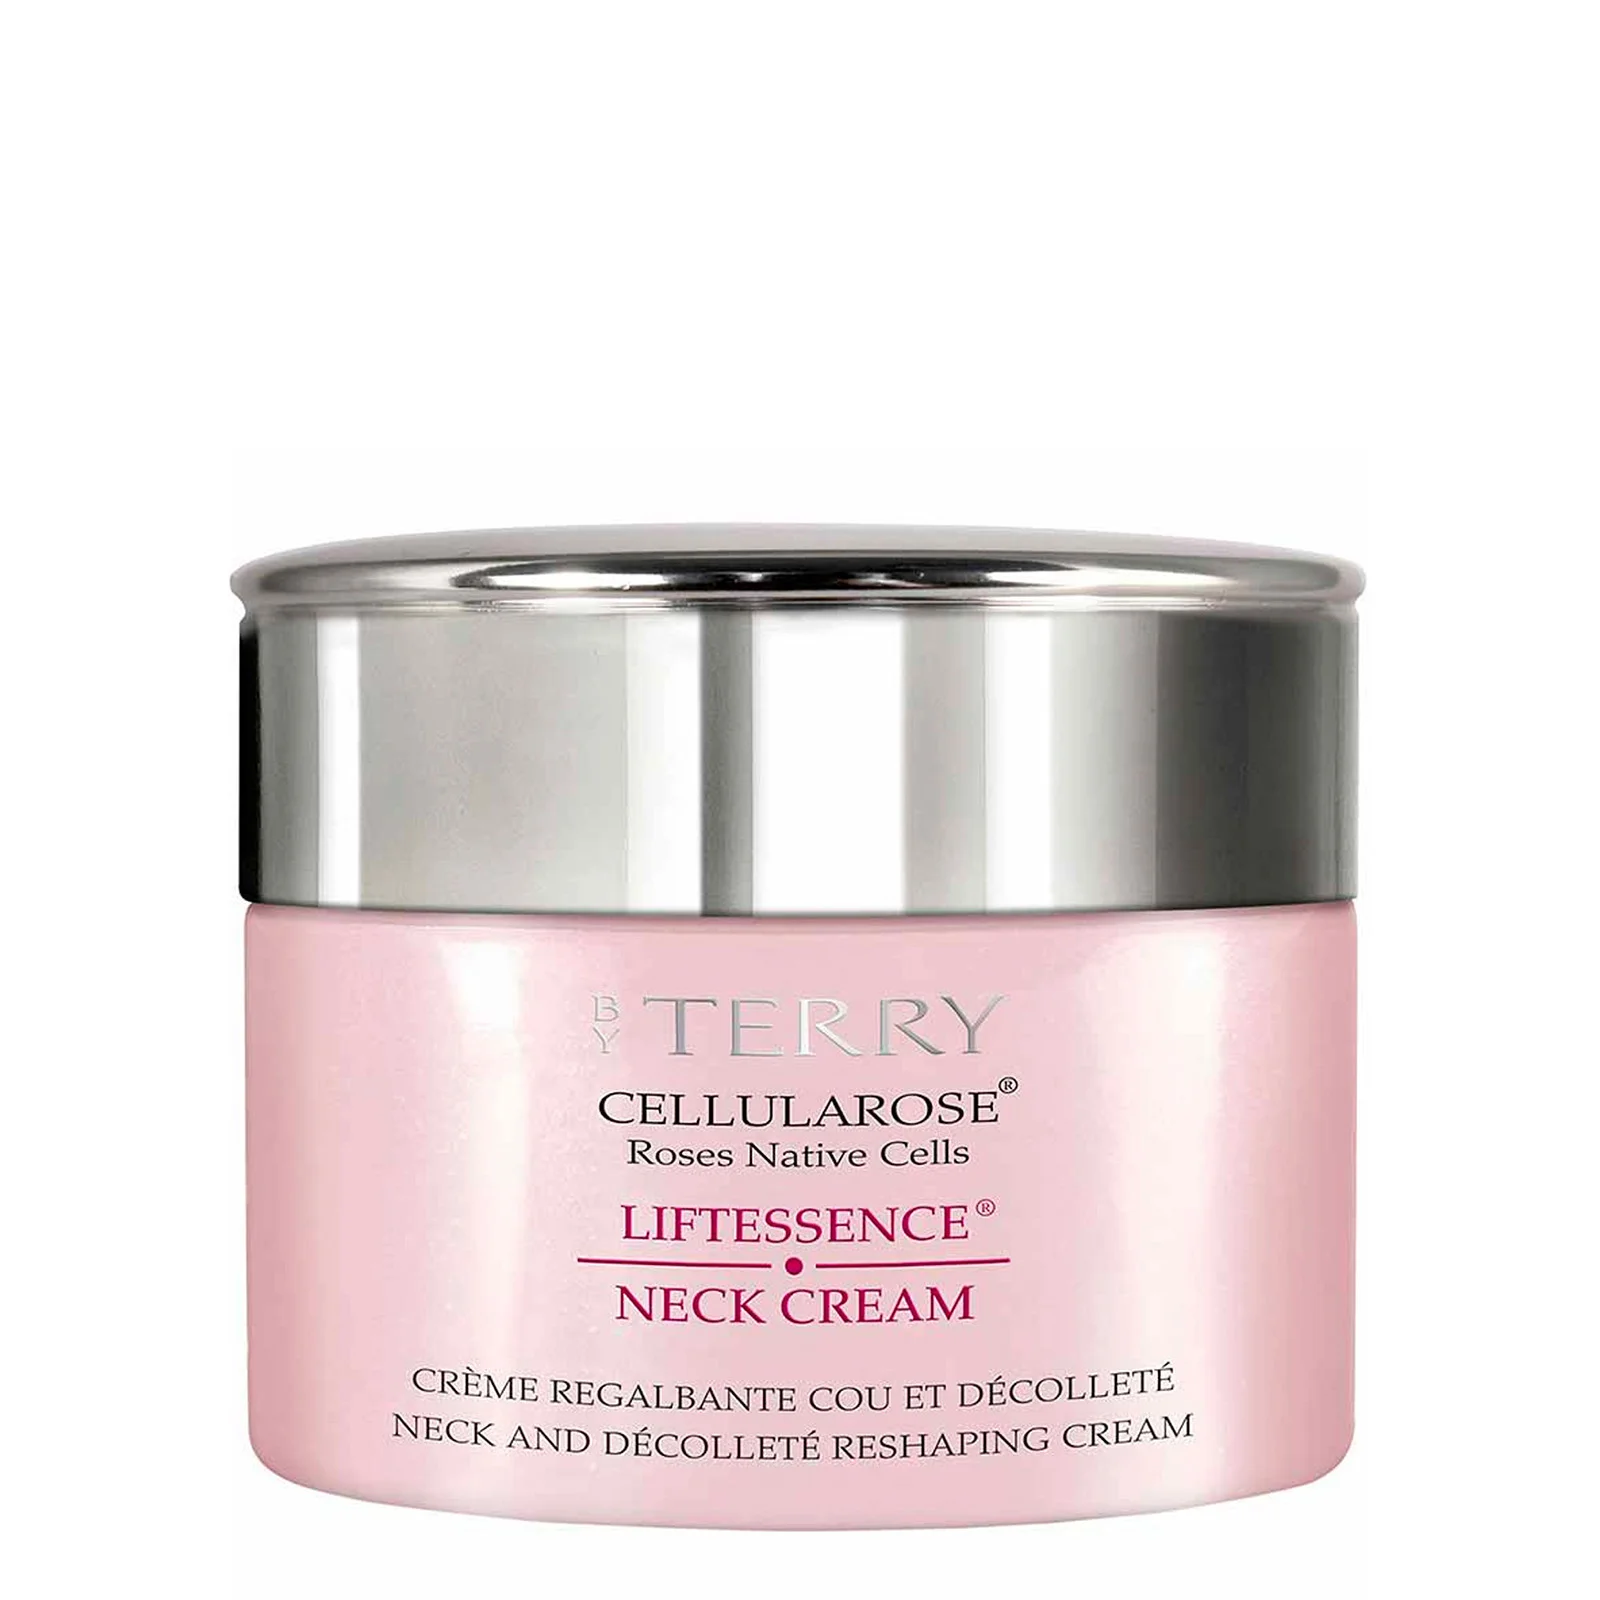 By Terry Liftessence Neck Cream 50g Image 1